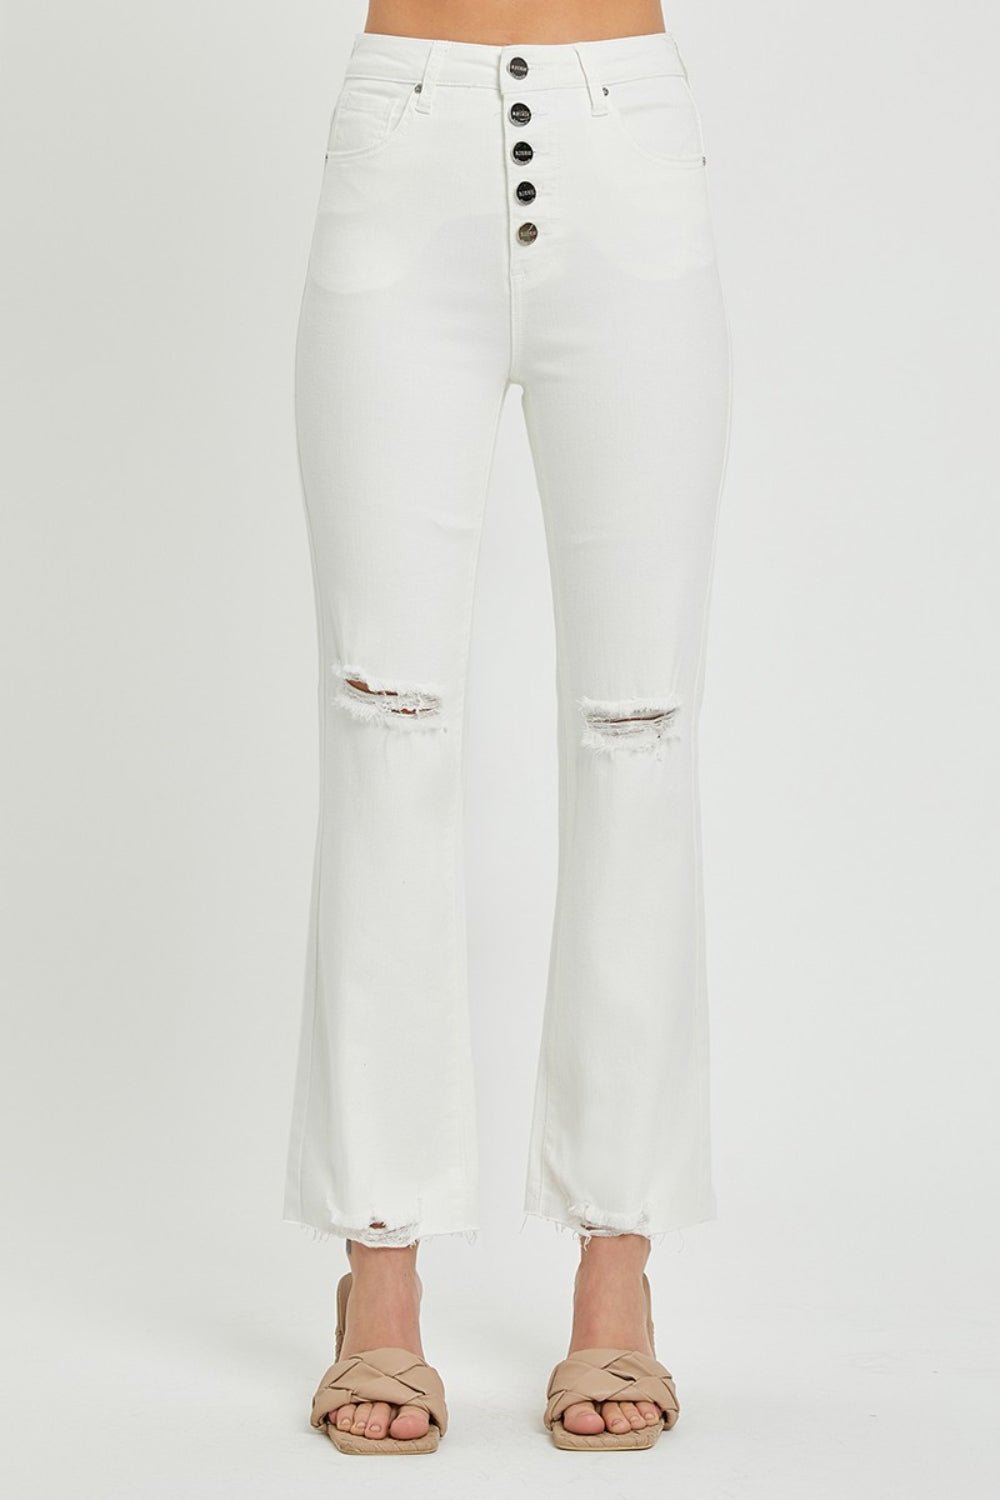 High Rise Button Fly Ankle Jeans in WhiteJeansRISEN